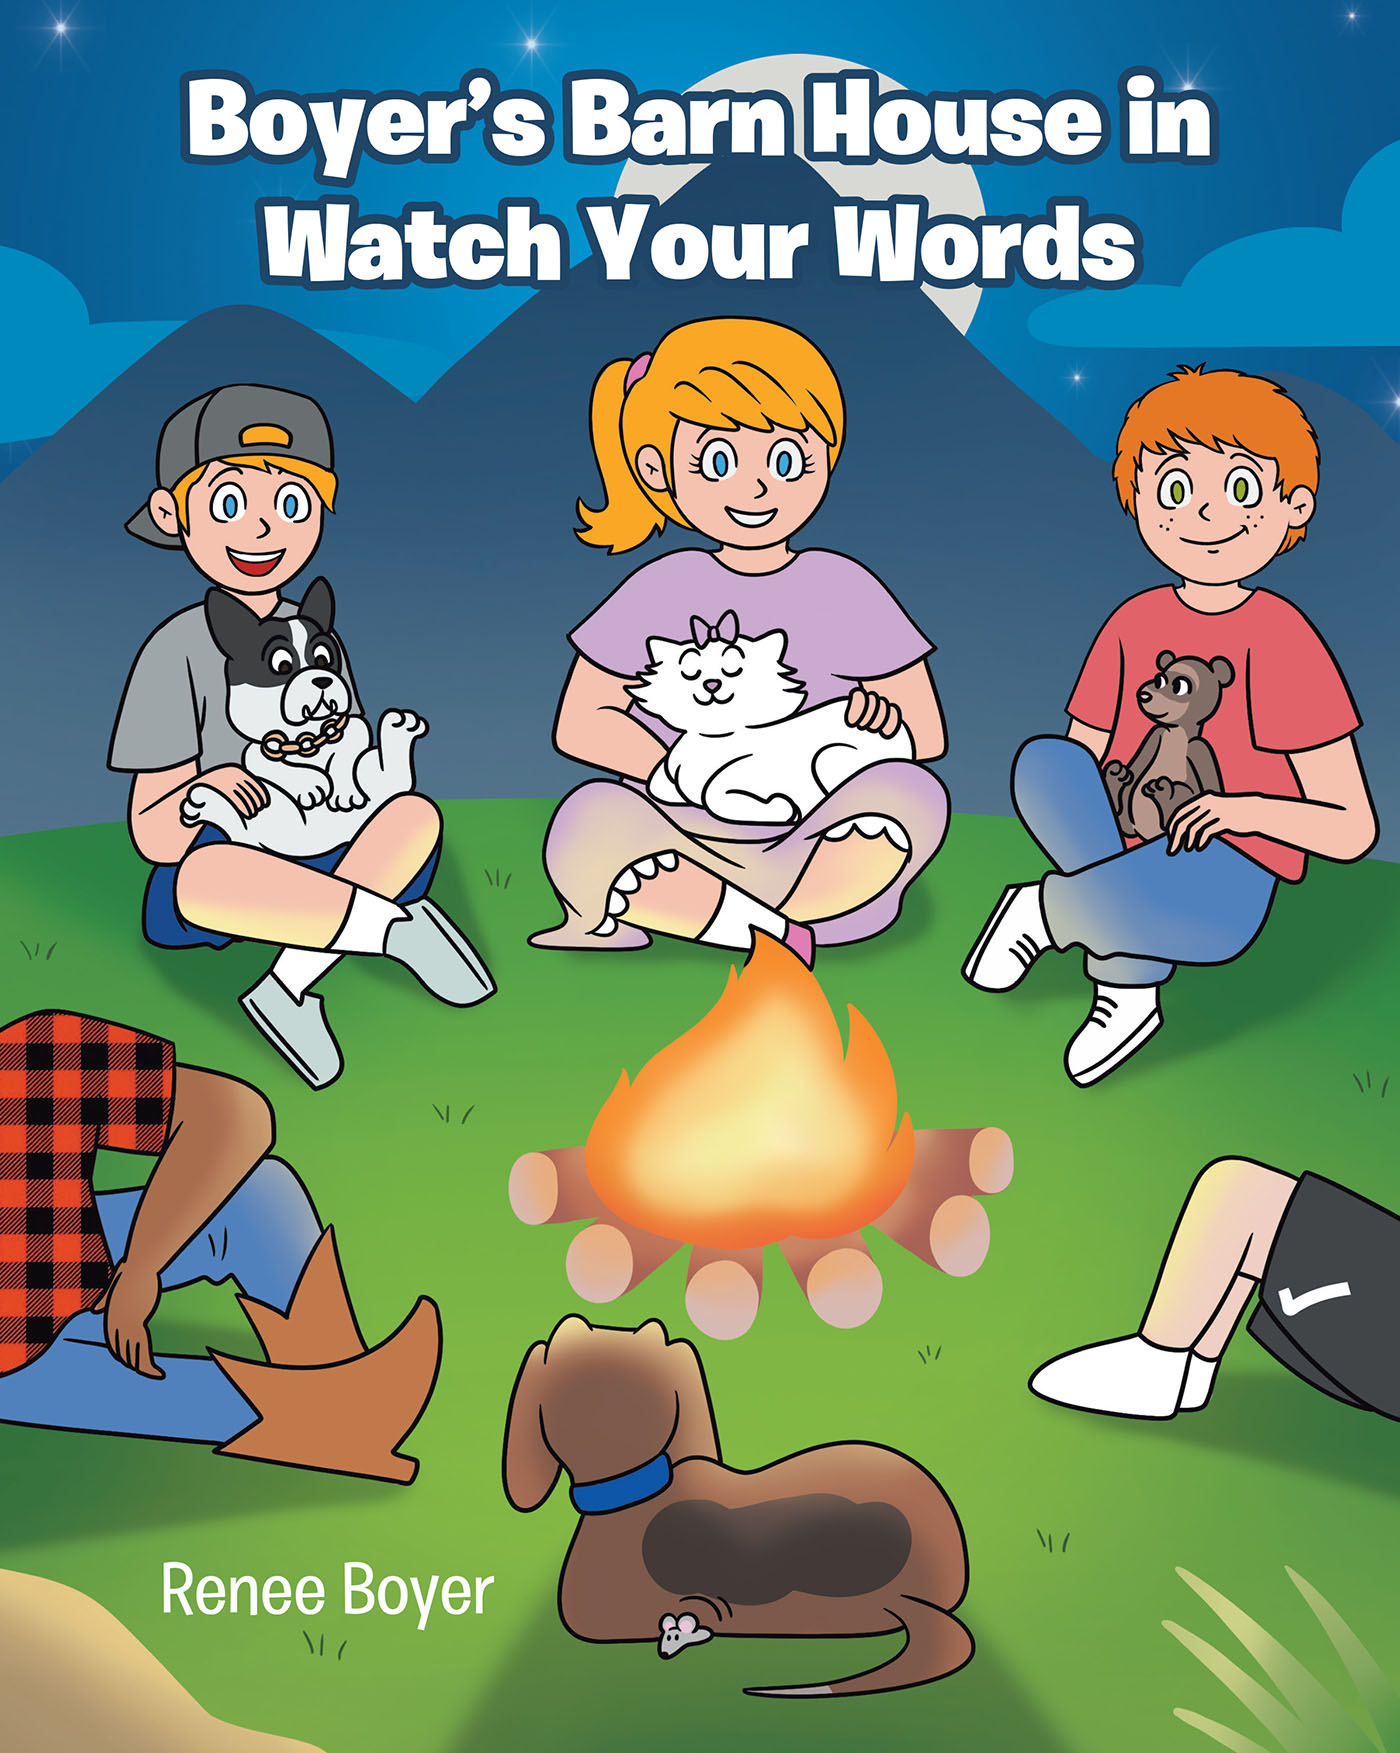 Renee Boyer’s Newly Released "Boyer’s Barn House in Watch Your Words" is a Helpful Teaching Tool for Helping to Learn the Power of One’s Words and Actions